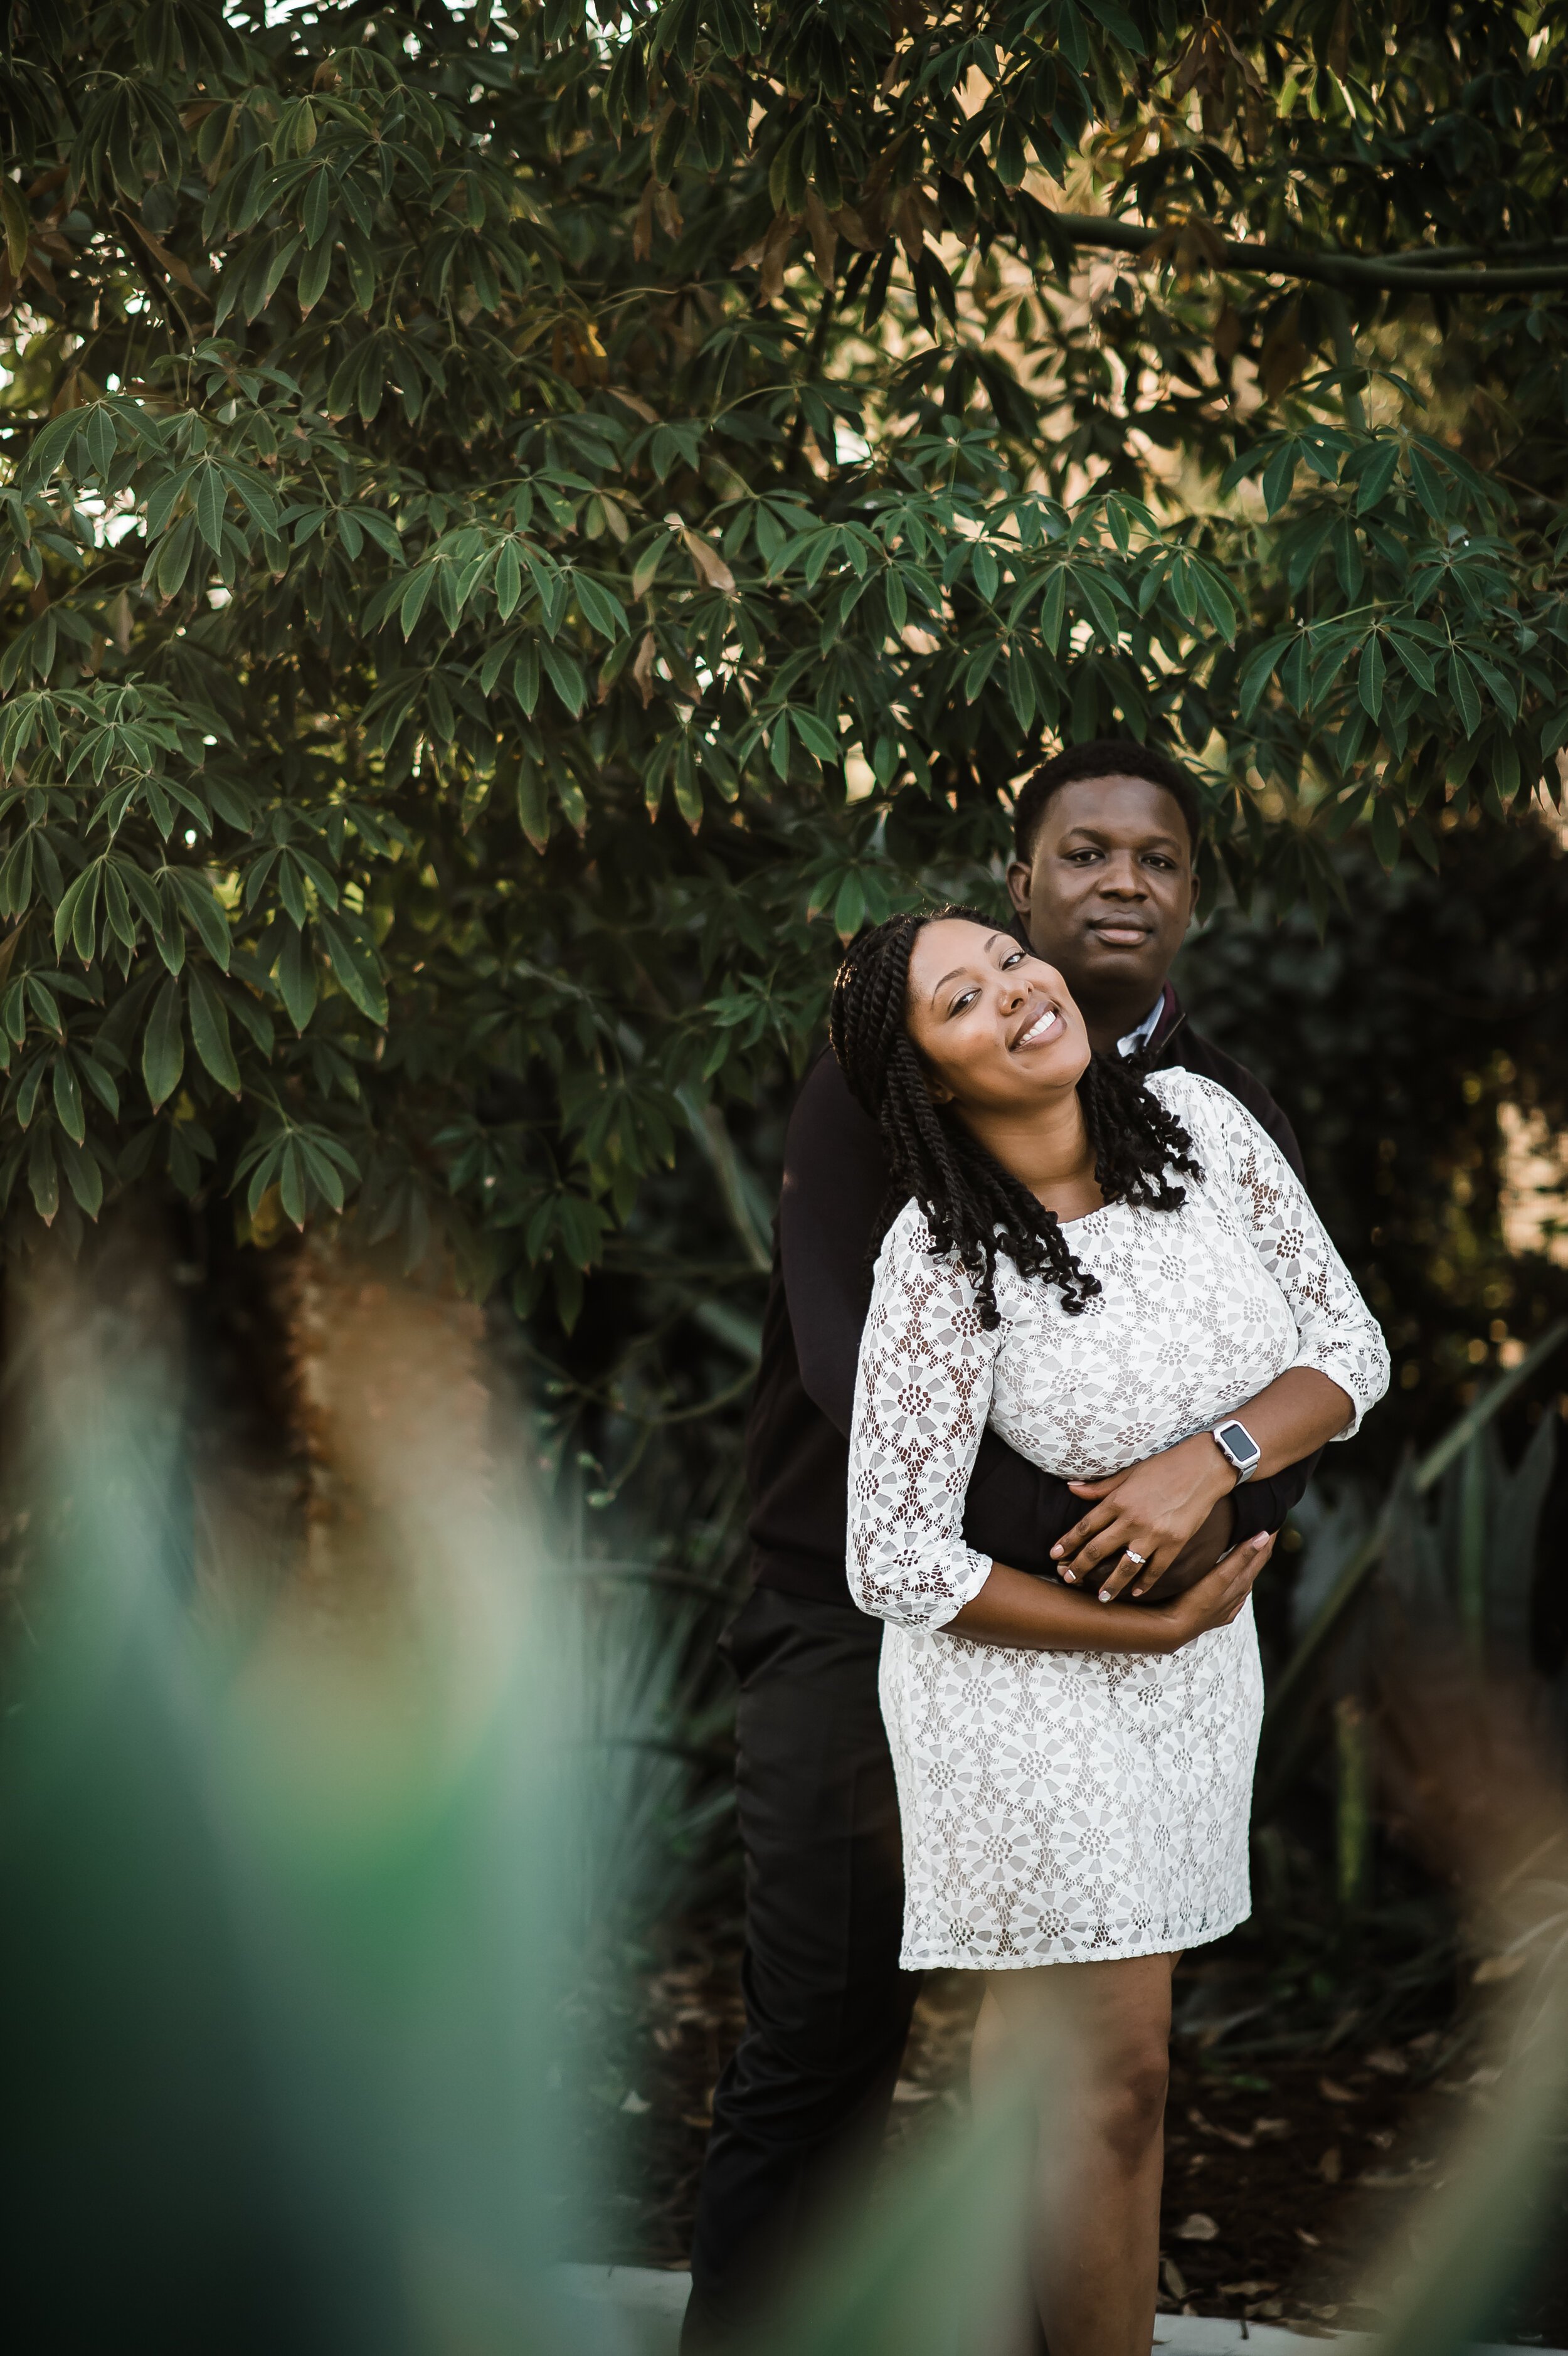 www.santabarbarawedding.com | Michelle Ramirez Photography | Couple in Front of Building with Ivy at Engagement Shoot